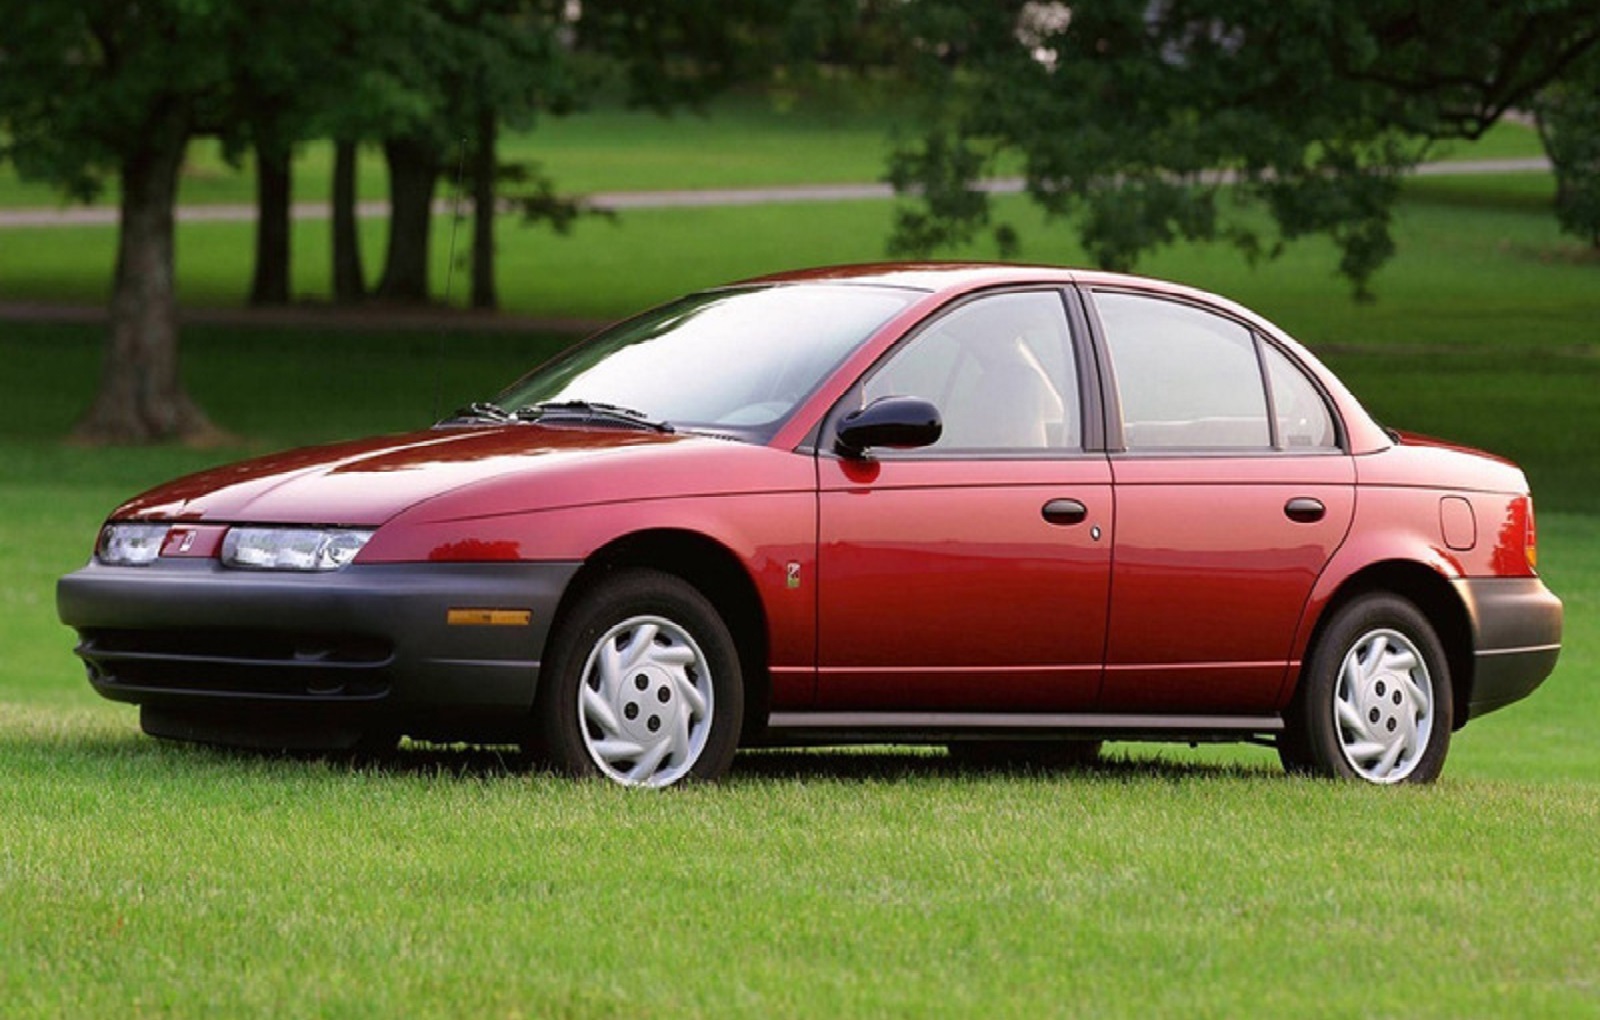 <p>Part of the General Motors family, the Saturn S-Series was notable for its extended <strong>proboscis</strong> front end that hinted at sporting prowess. That was unlikely with the 1.9-litre engine used in the first generation, but it did stand out for using <strong>plastic body panels</strong> hung from a spaceframe-style chassis.</p><p>Saturn also turned out 450 right-hand drive versions in 1999 specifically for the United States Postal Service so the driver could exit on the kerbside for deliveries.</p>